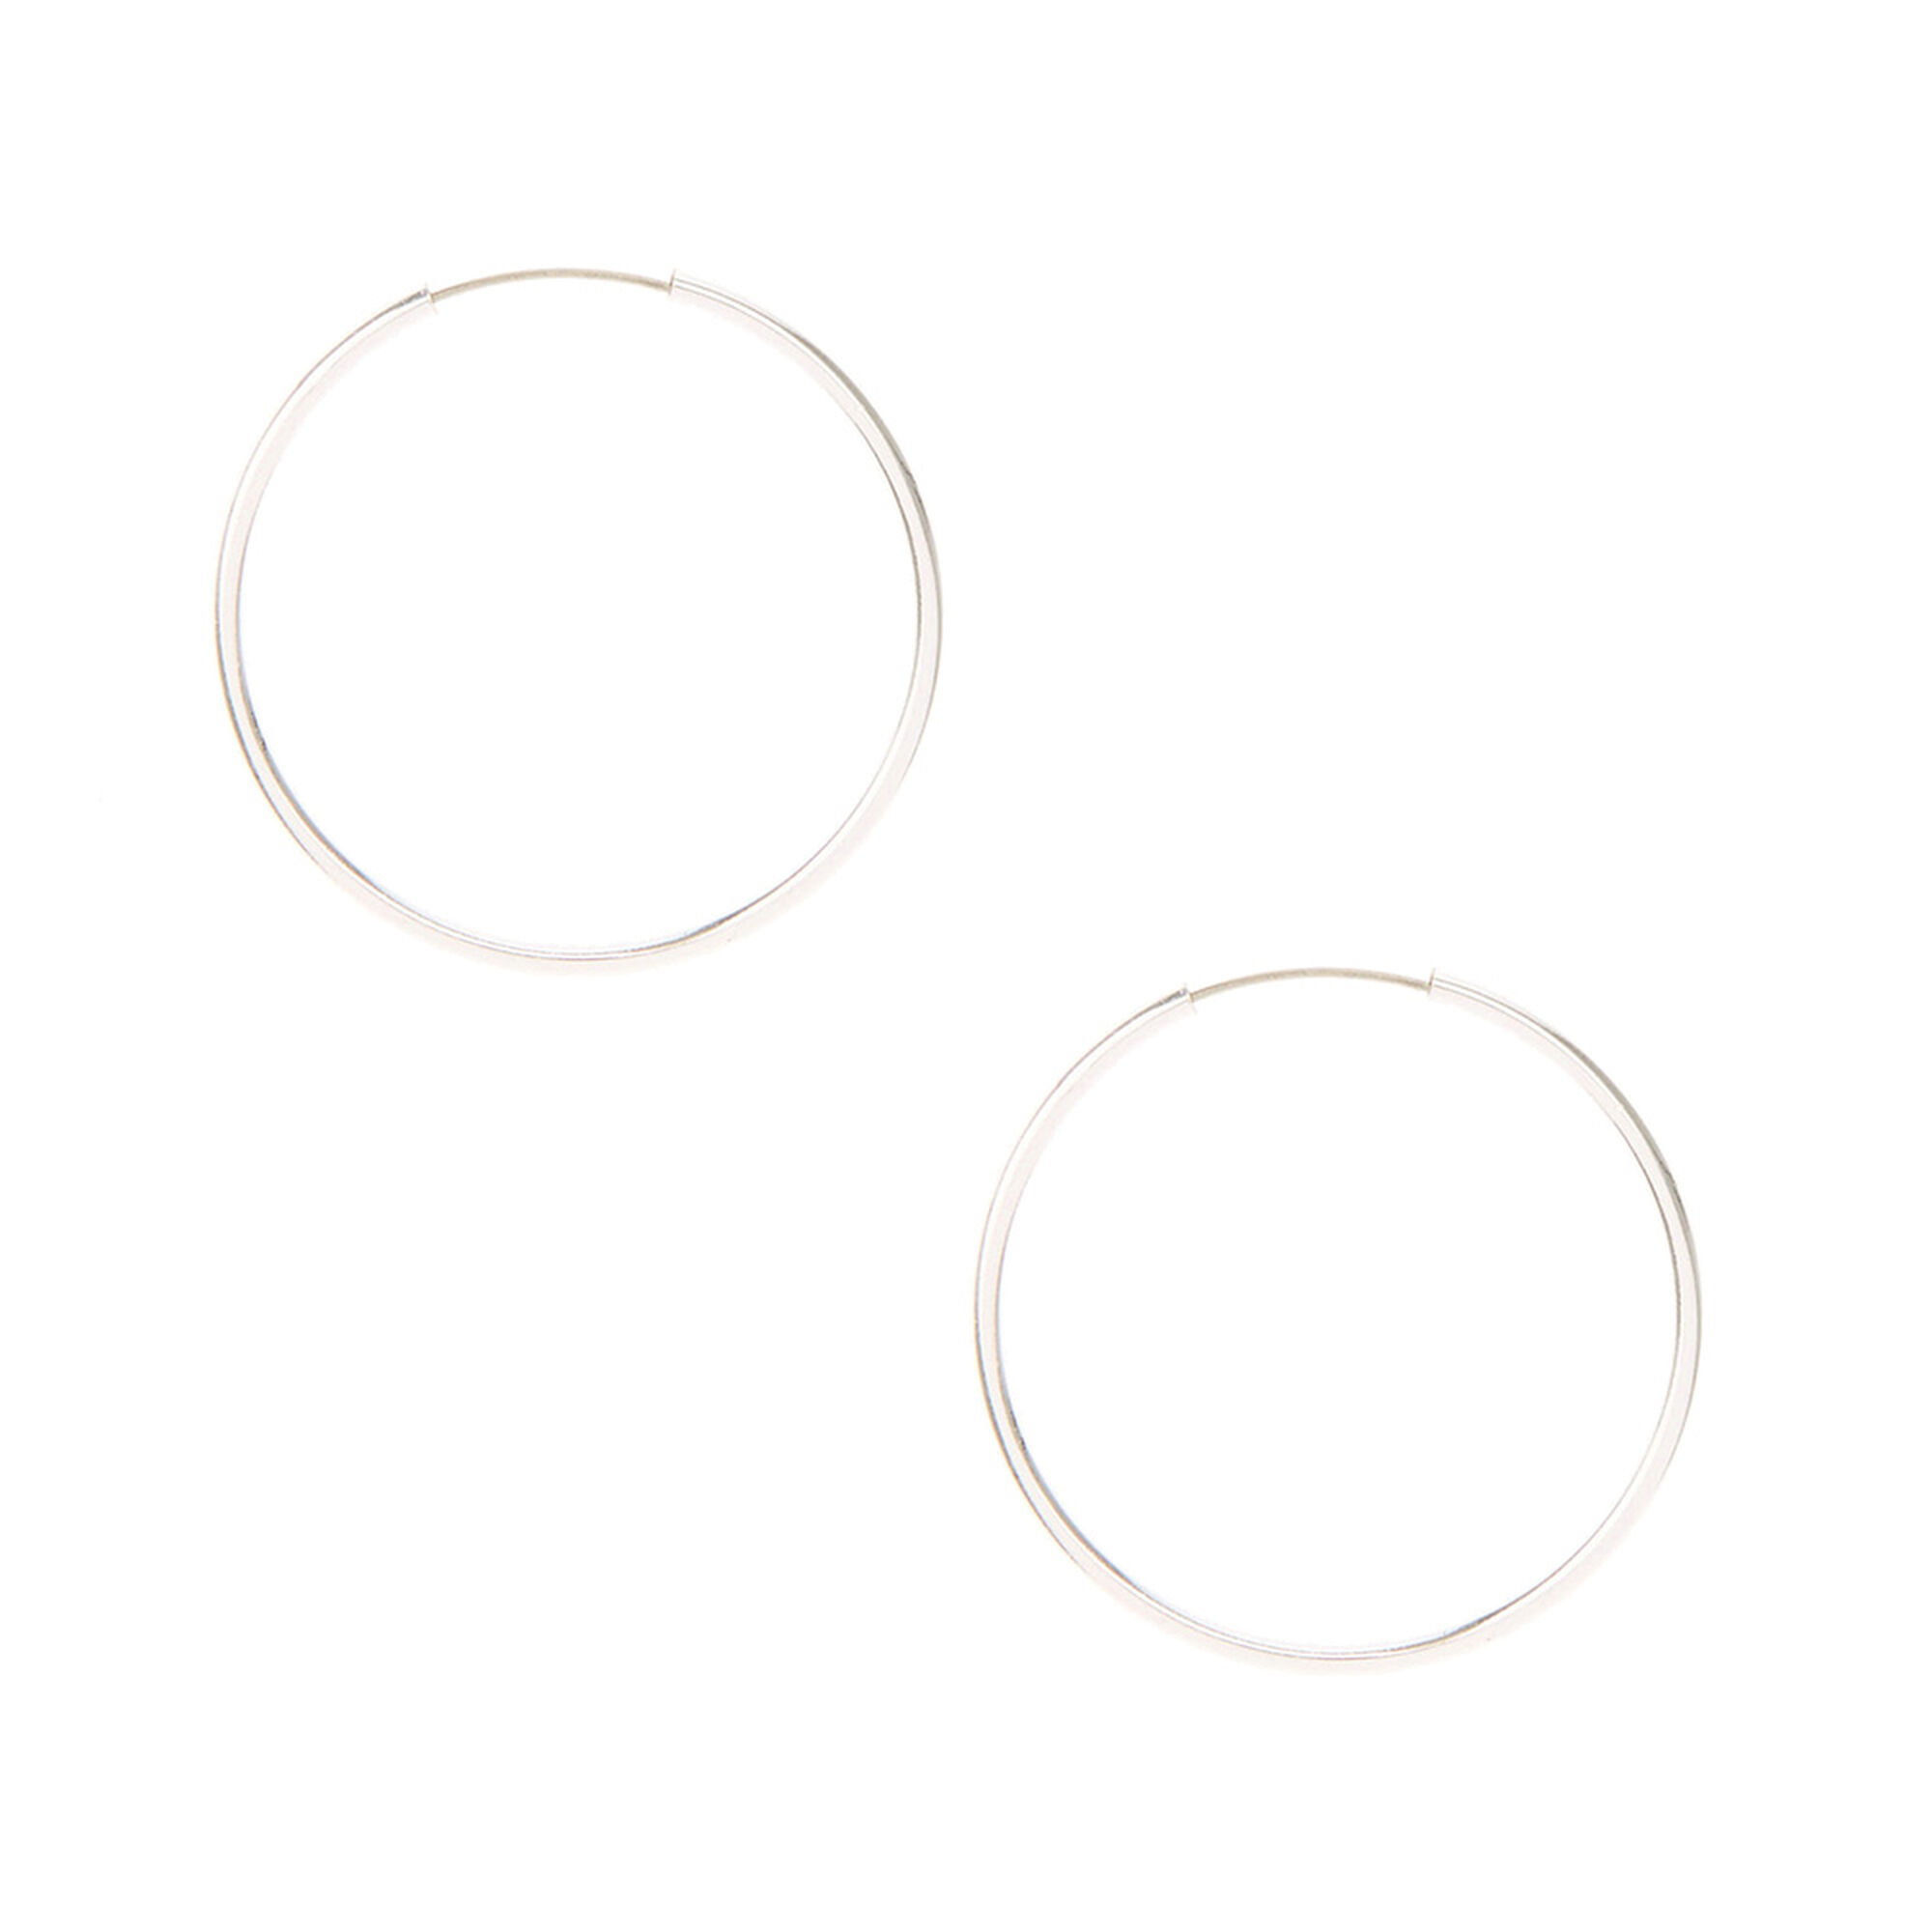 View Claires Tone 25MM Hoop Earrings Silver information